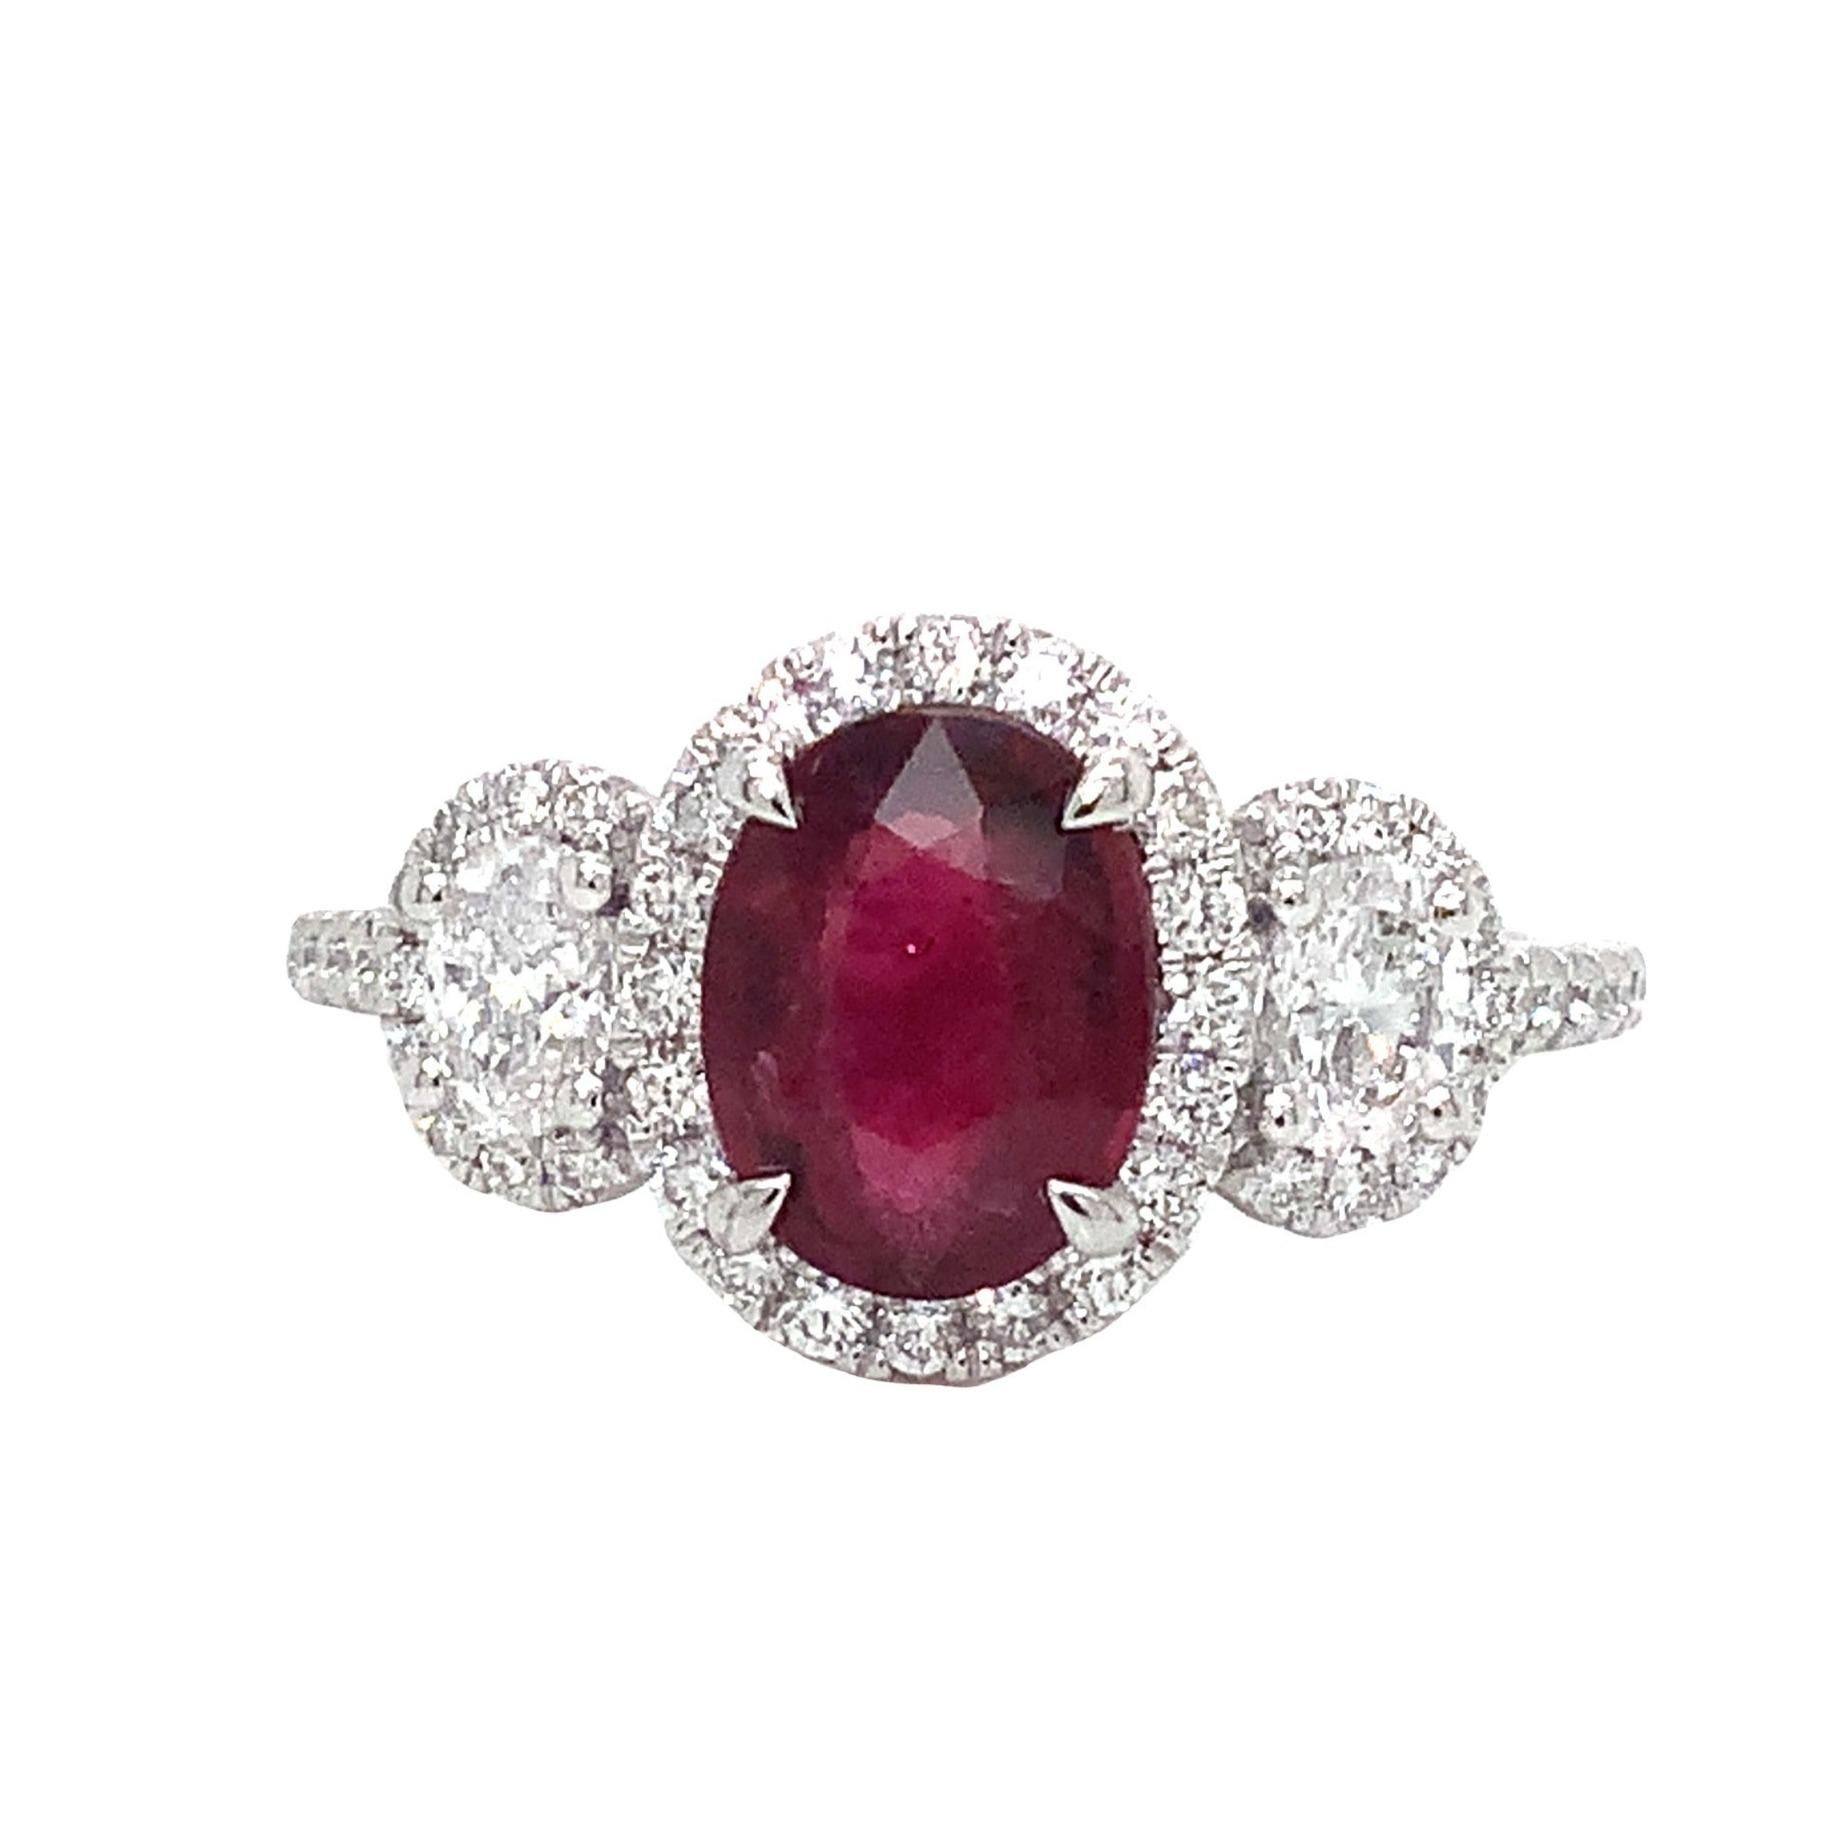 The 950 Platinum Roman + Jules 3 Stone Ruby and Diamond Ring Set features a 1.34 carat, oval-shaped Ruby at its center with GIA Certificate# 5202650310. Boasting a Dark Medium Crimson Red Color and Very Good Clarity Make and Polish, this